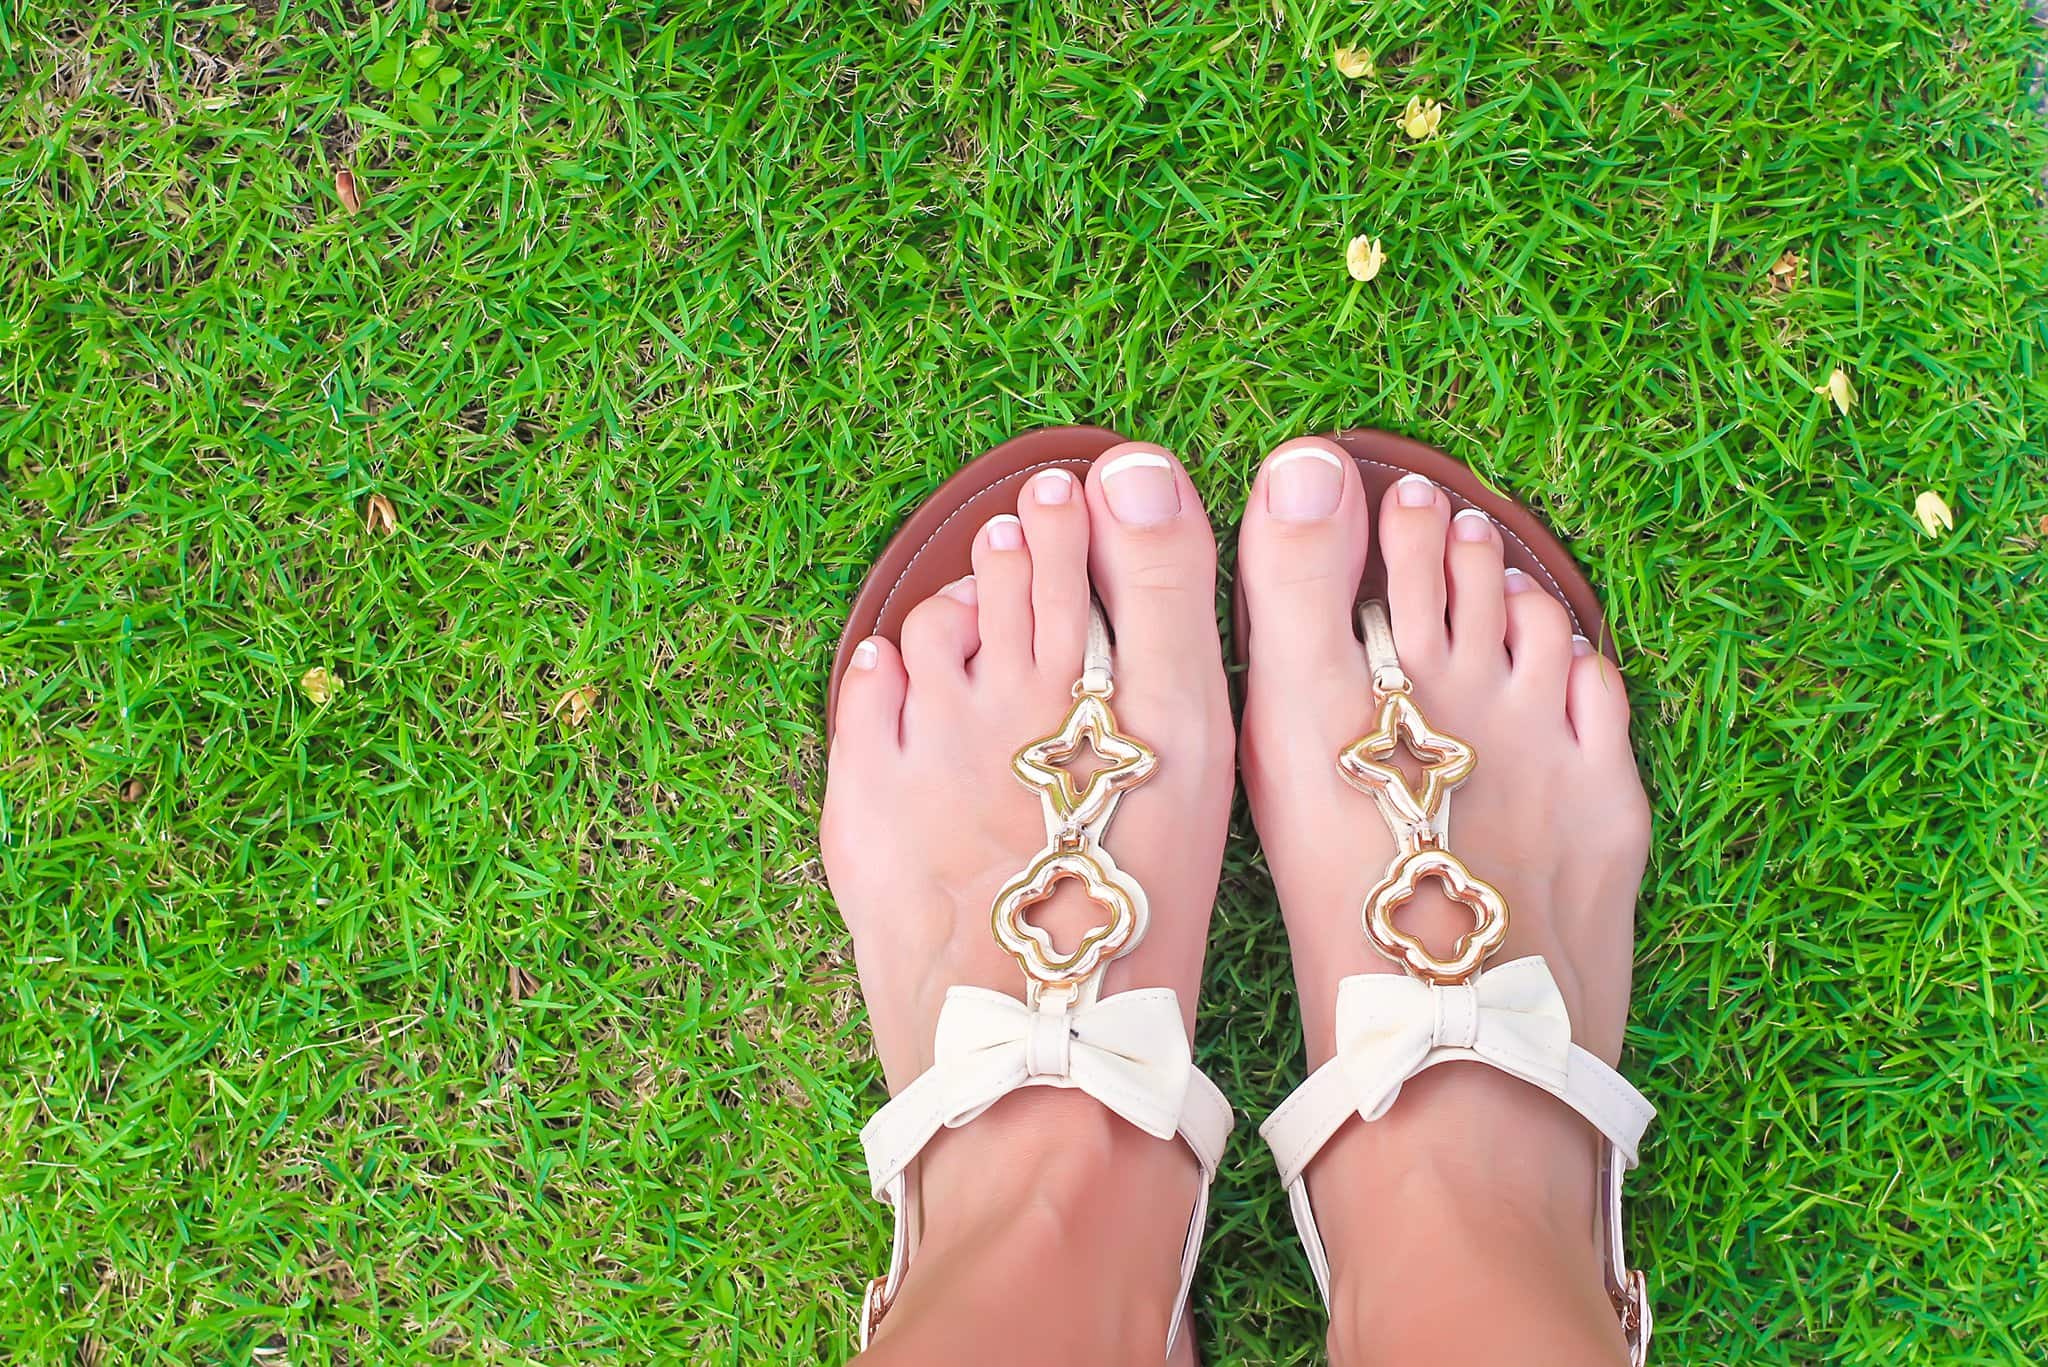 Thong sandals are defined by the strip of leather between the toes connected to the strap across the top or around the sides of the sandals